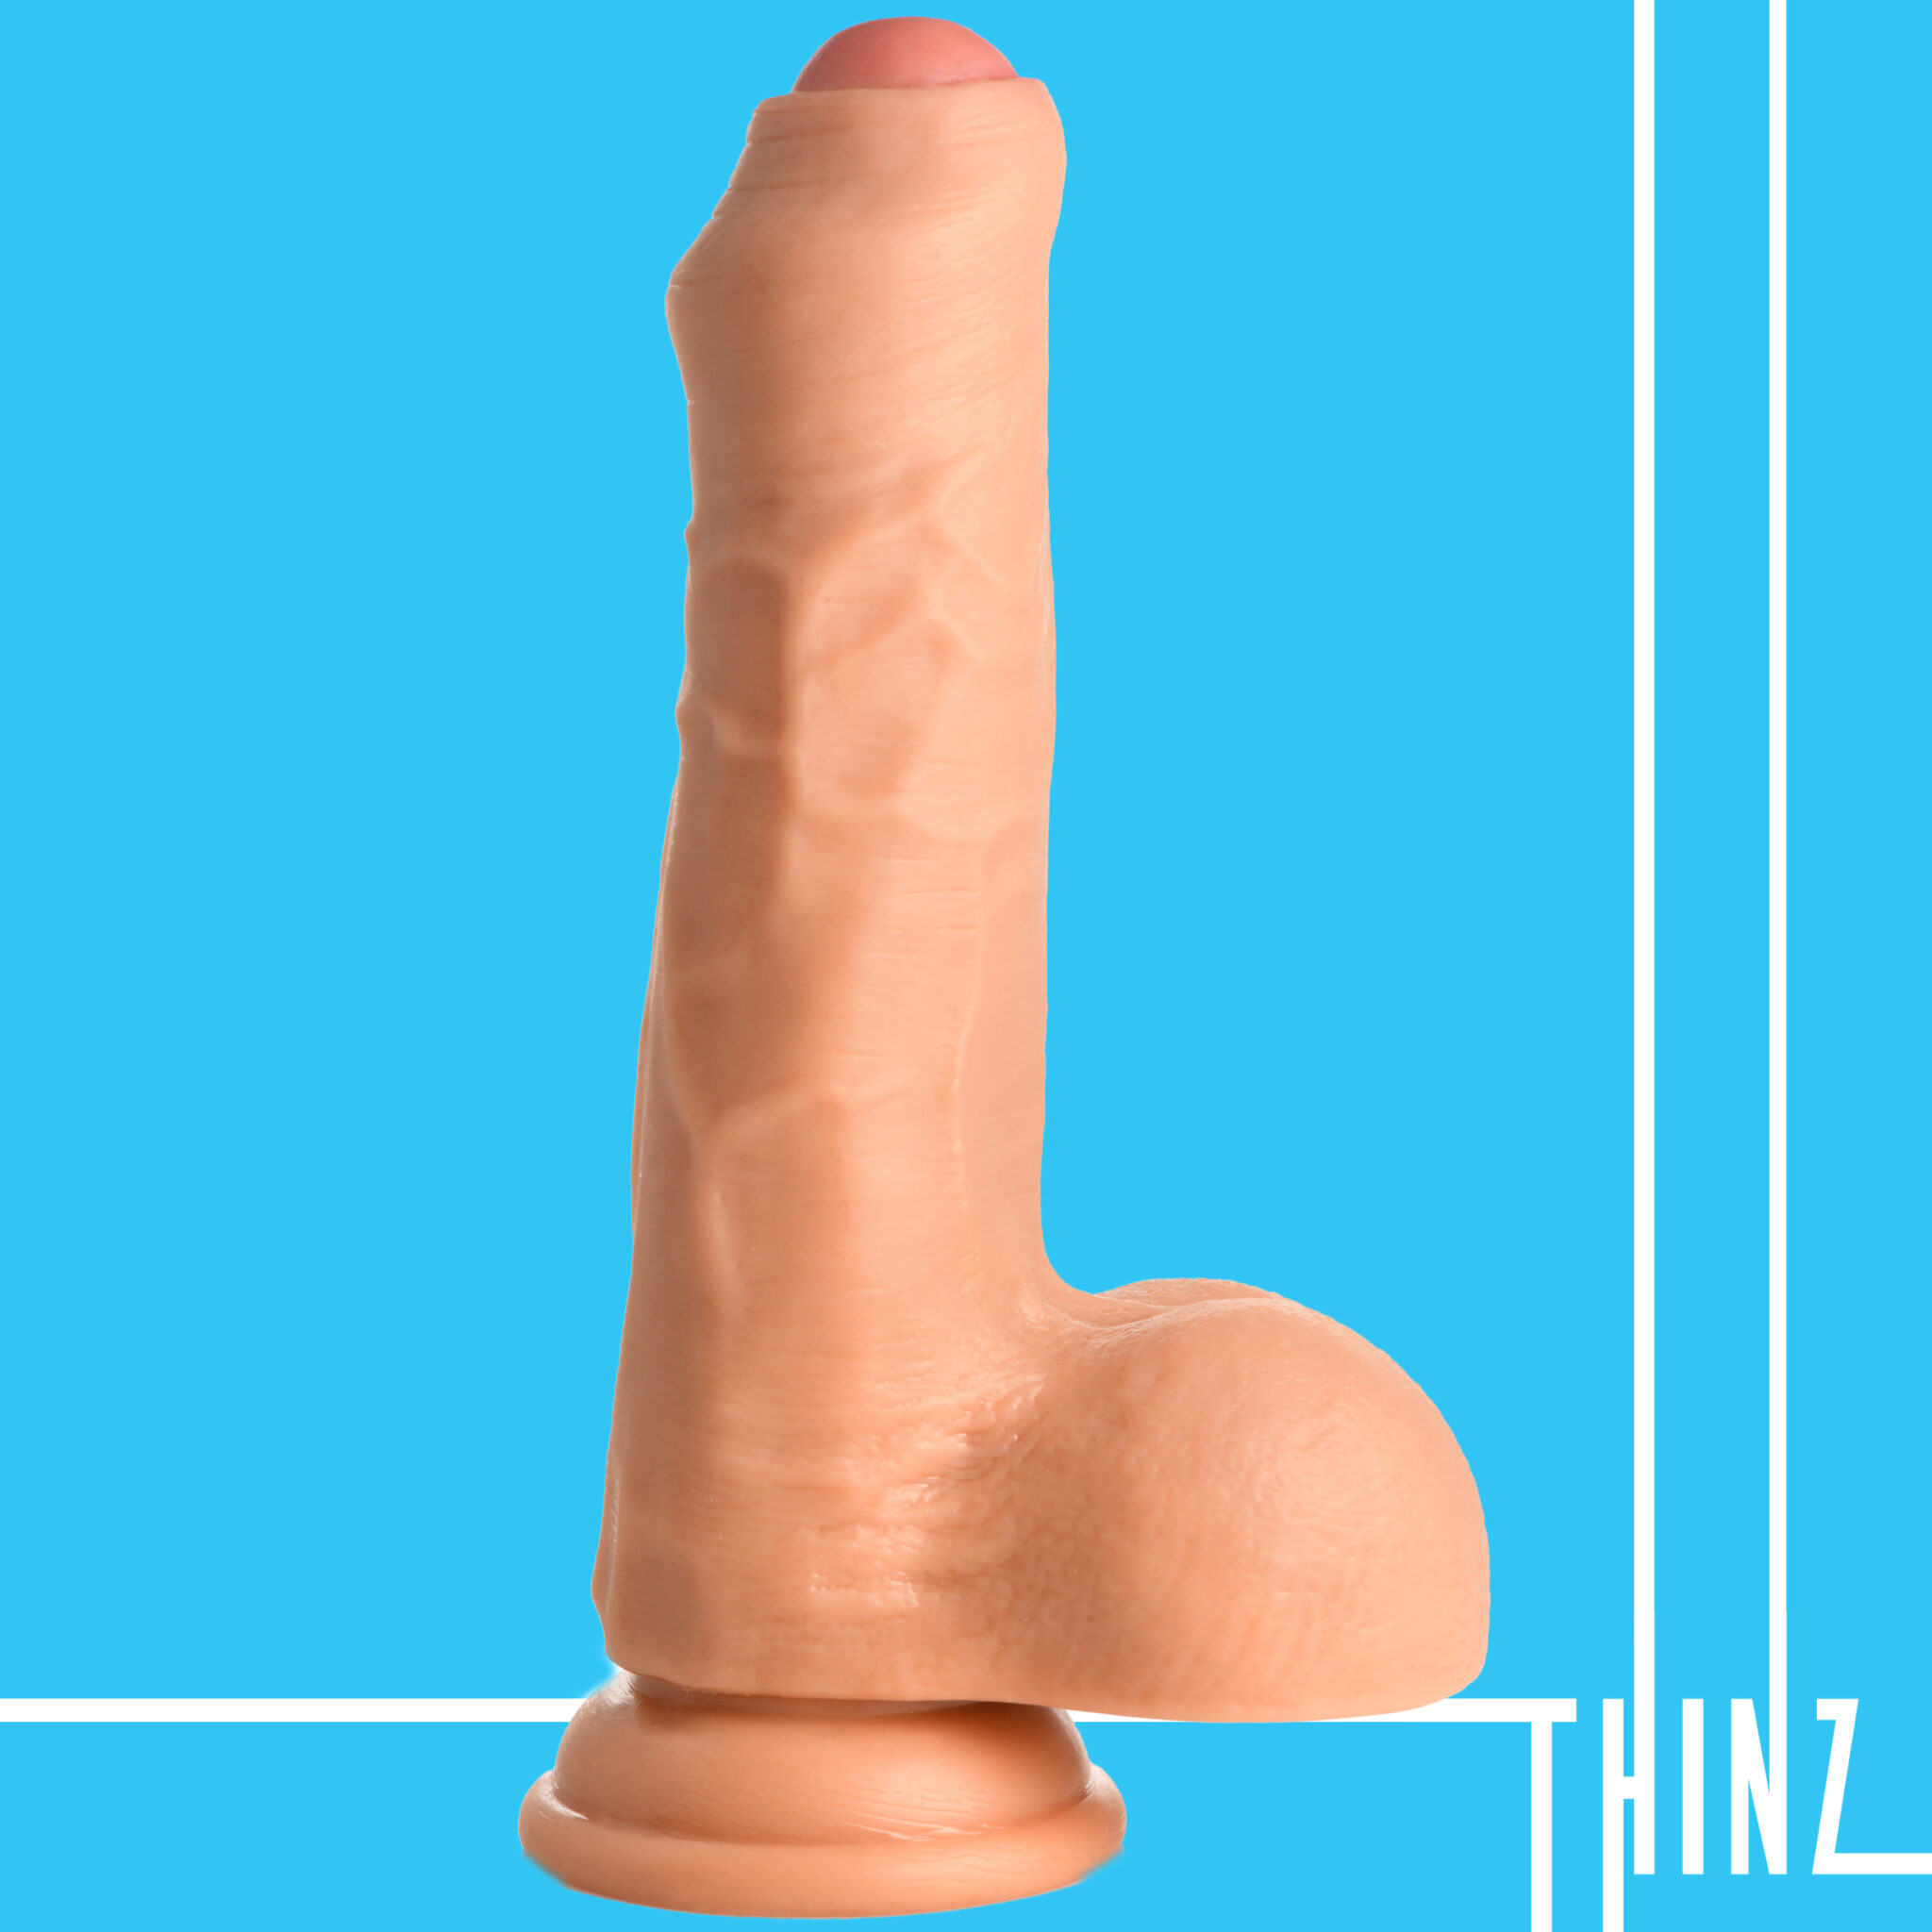 7 Inch uncut Dildo with Balls-7